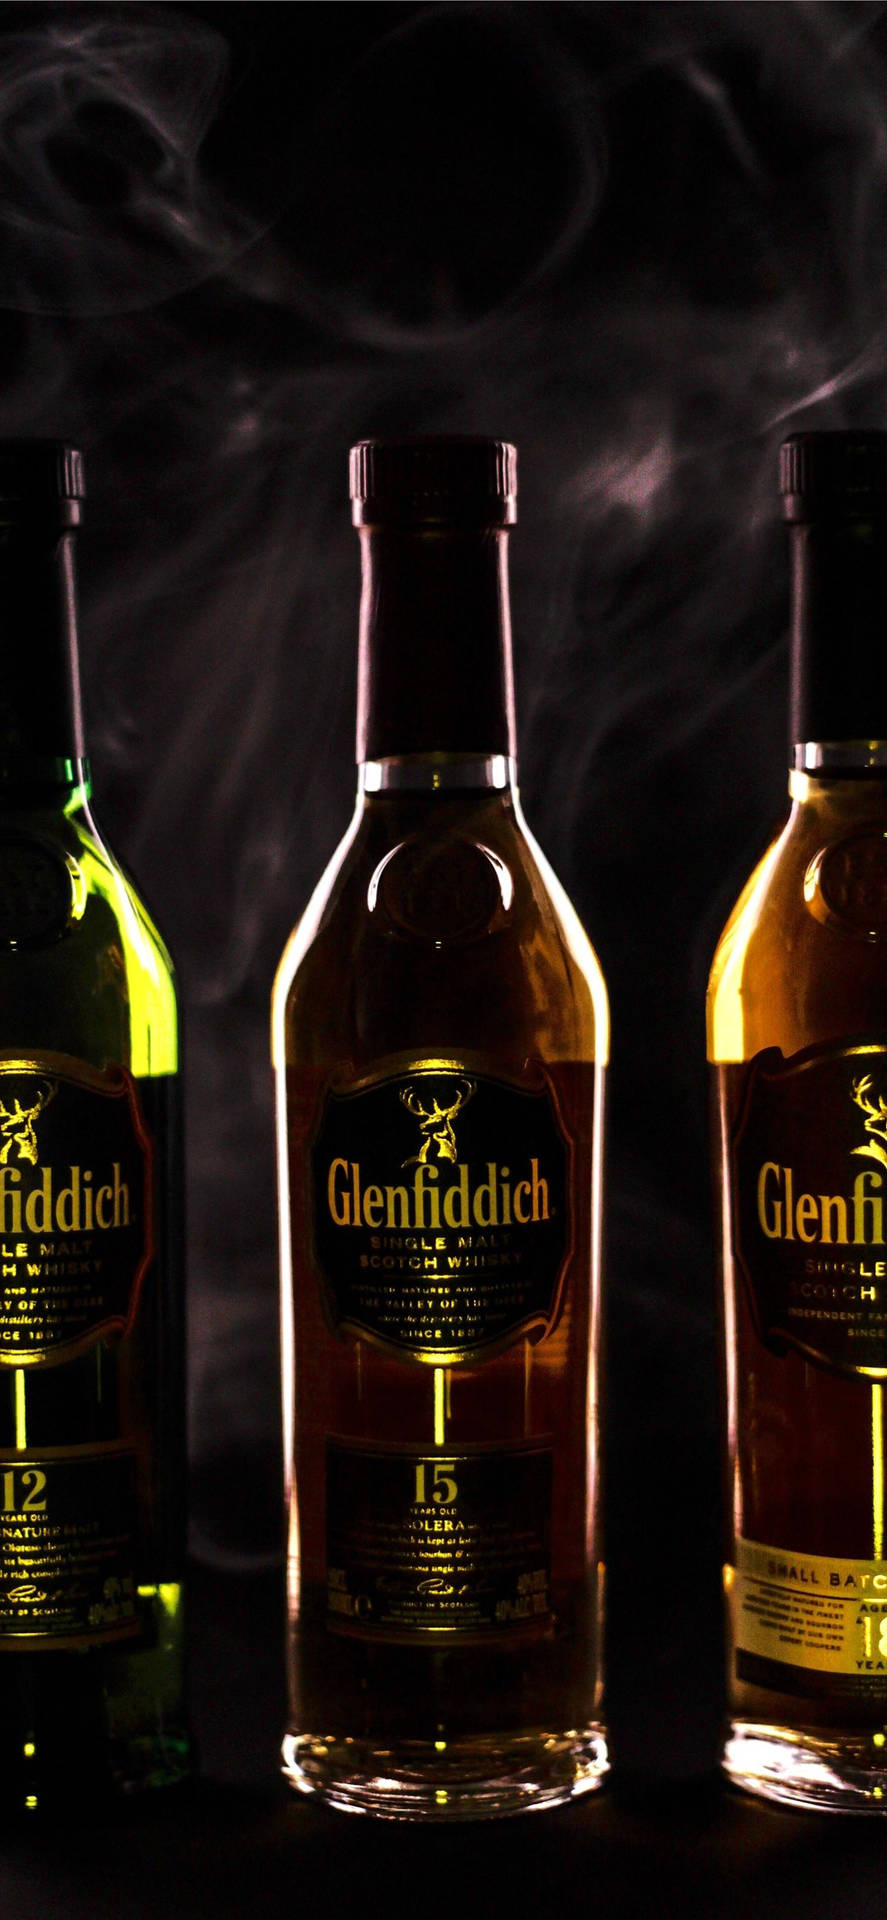 Glenfiddich Whiskies In Dim Lighting Picture